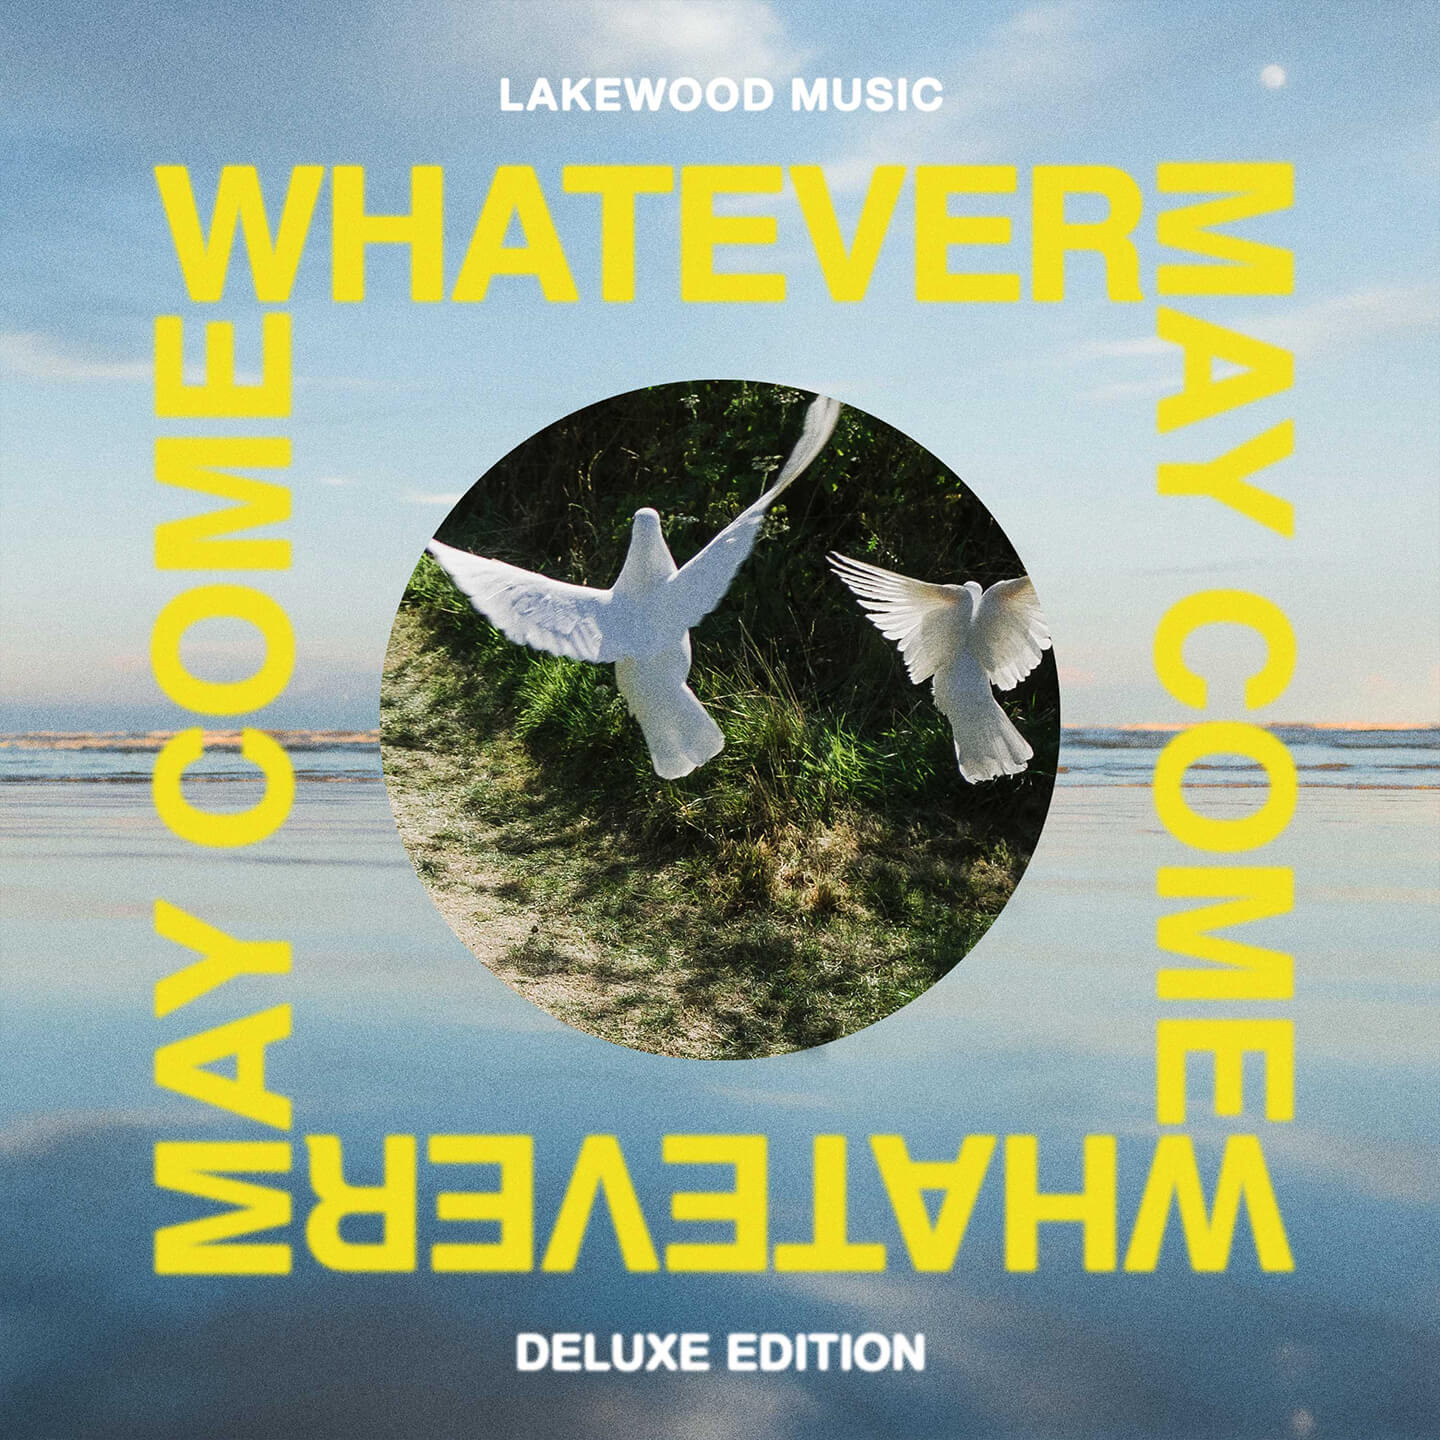 Whatever May Come Deluxe Edition